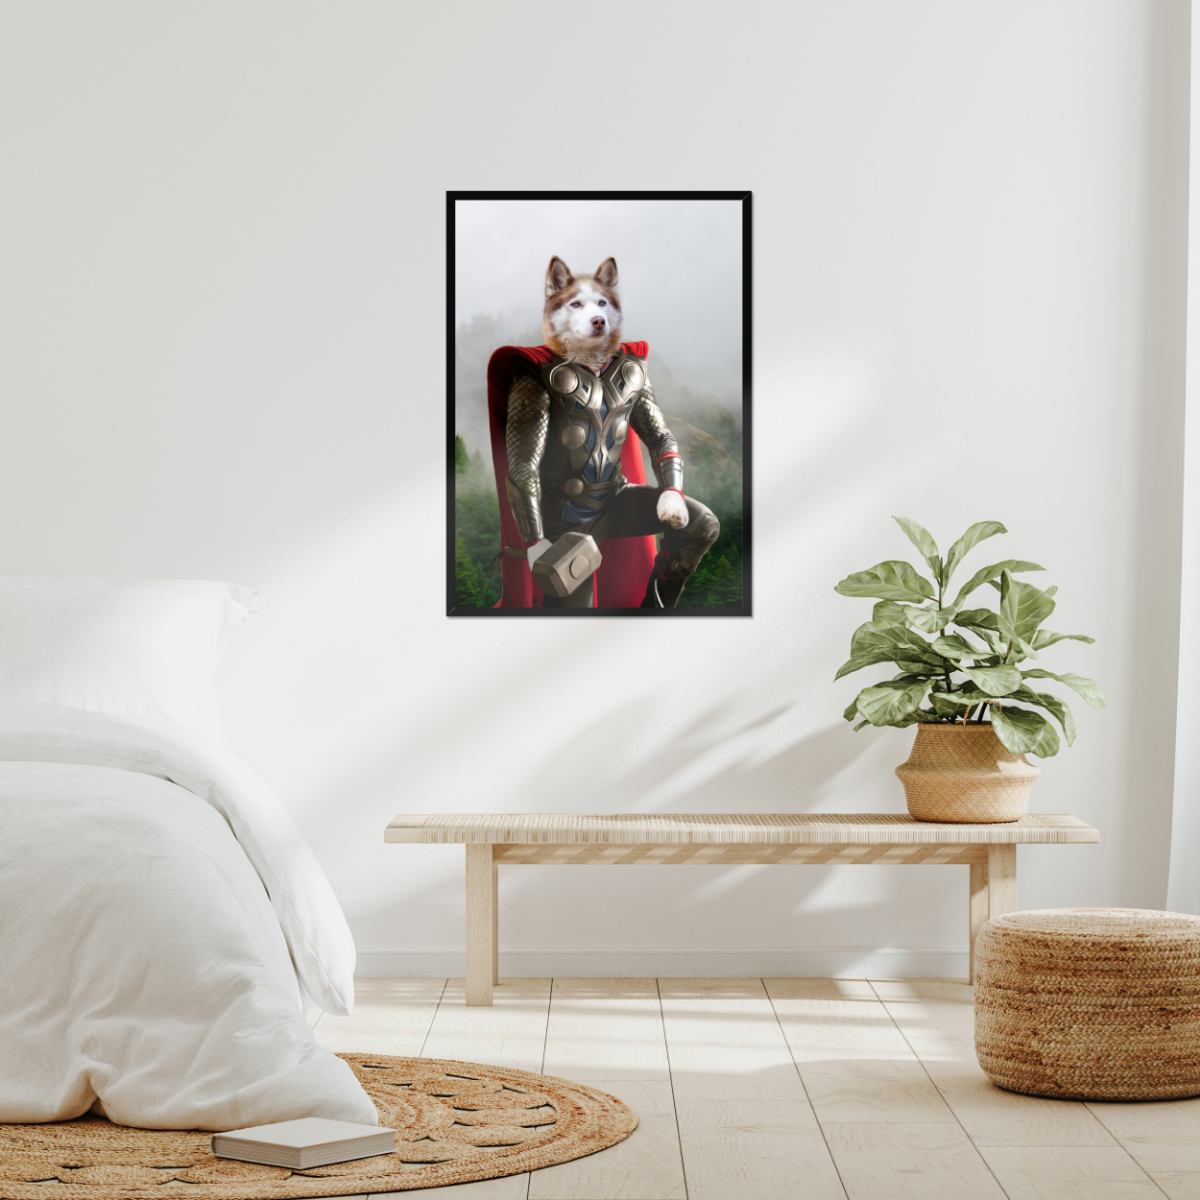 Thor: Custom Pet Portrait - Paw & Glory - #pet portraits# - #dog portraits# - #pet portraits uk#Paw & Glory, pawandglory, for pet portraits, paintings of pets from photos, dog portraits admiral, pet portrait singapore, admiral pet portrait, minimal dog art, pet portraits